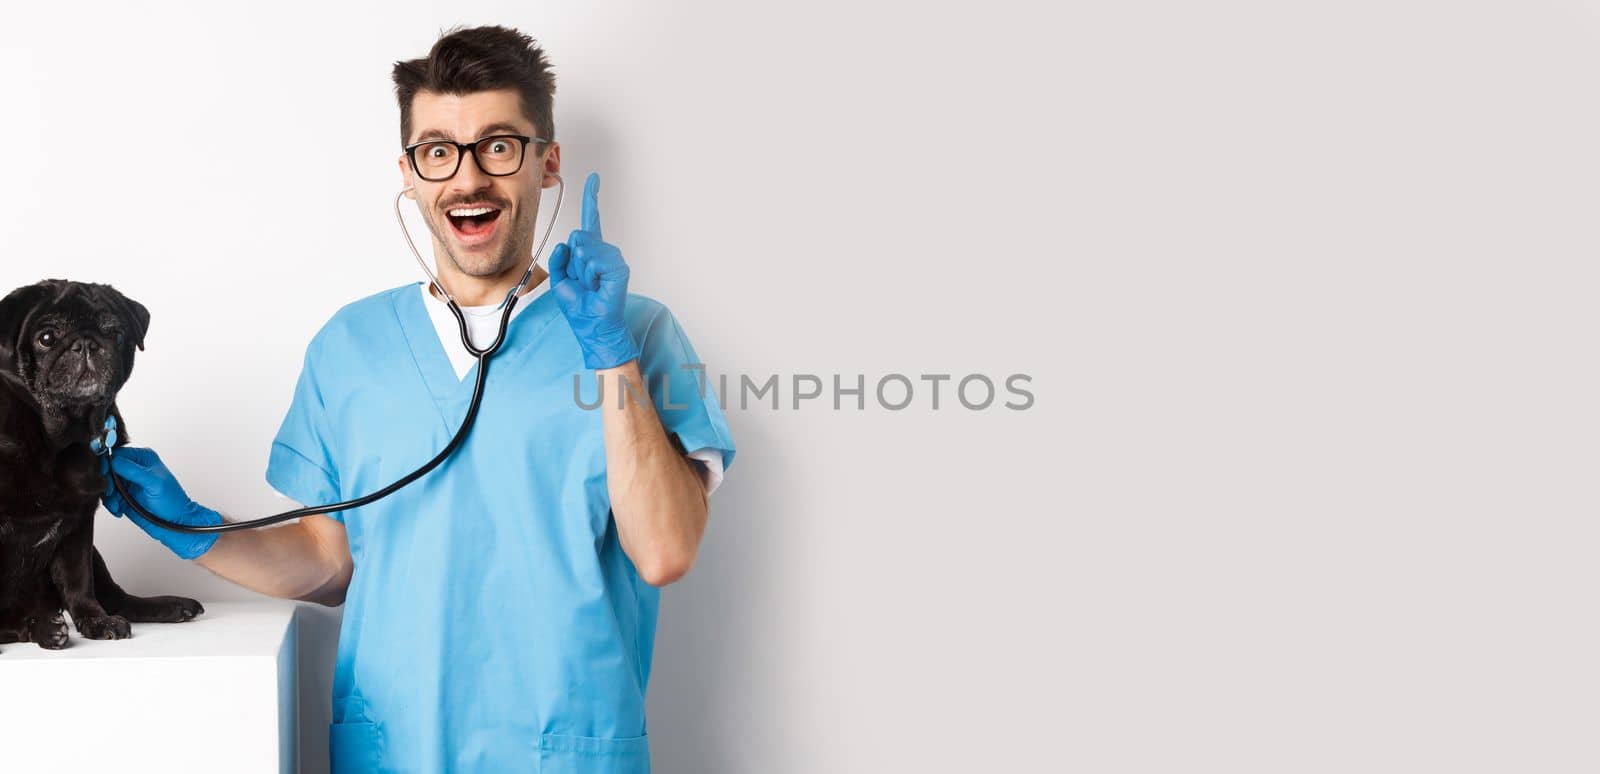 Excited male doctor veterinarian having an idea while examining cute pug dog with stethoscope, raising finger in eureka sign, white background.